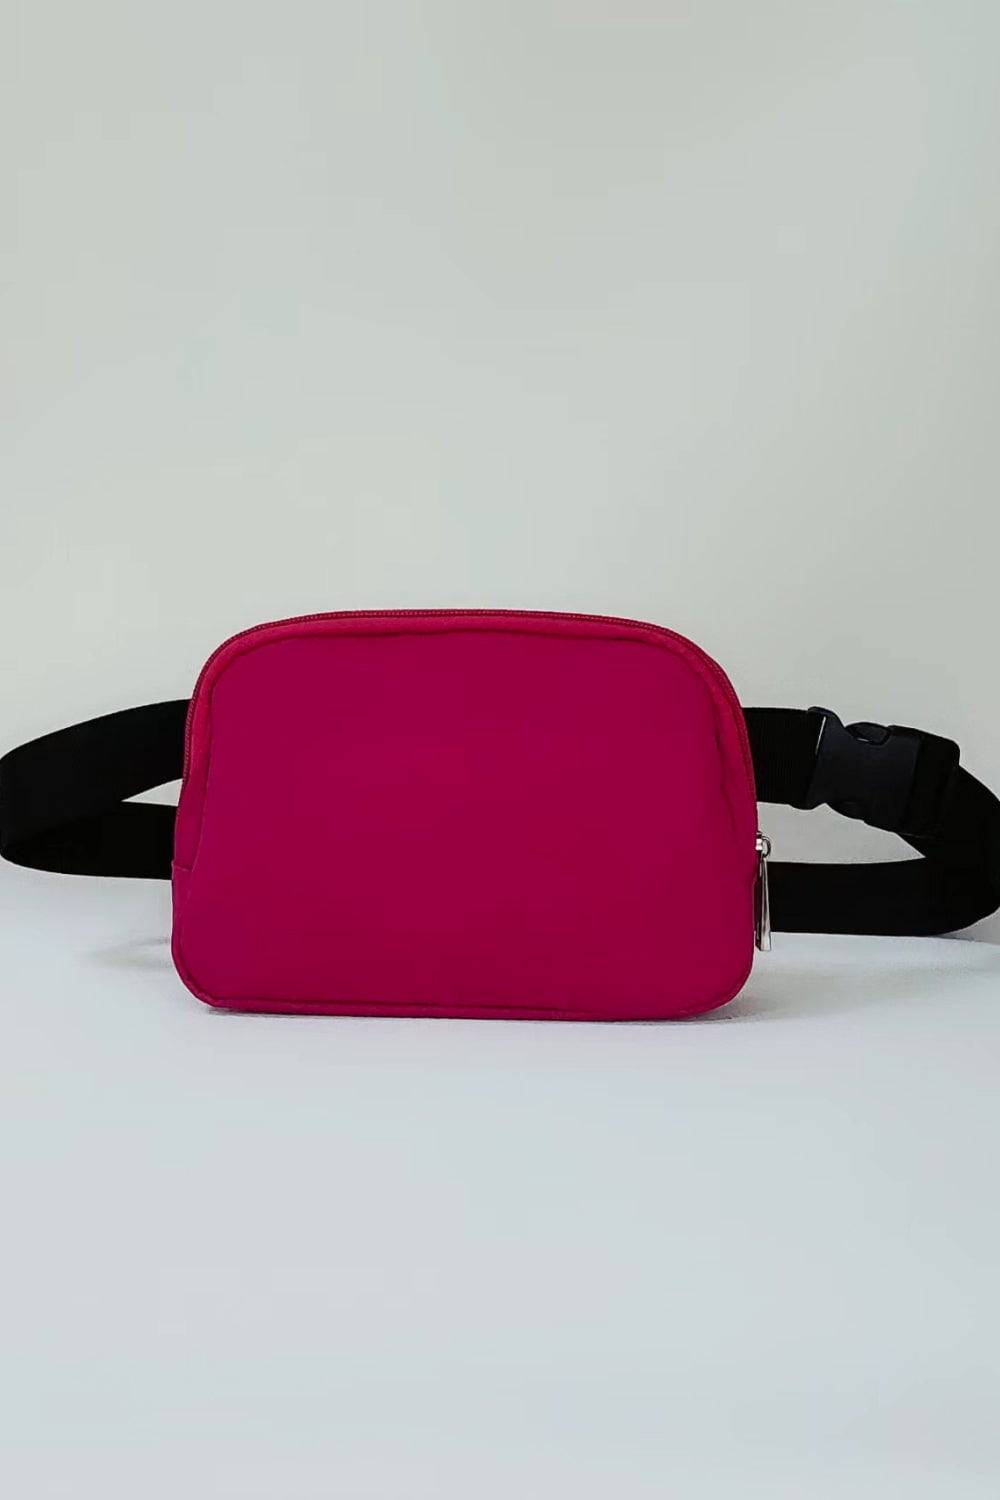 Heart's Desire Fanny Pack - Embrace your Hip and Capture your Heart - Travel with Elegance, Comfort and Security - Guy Christopher